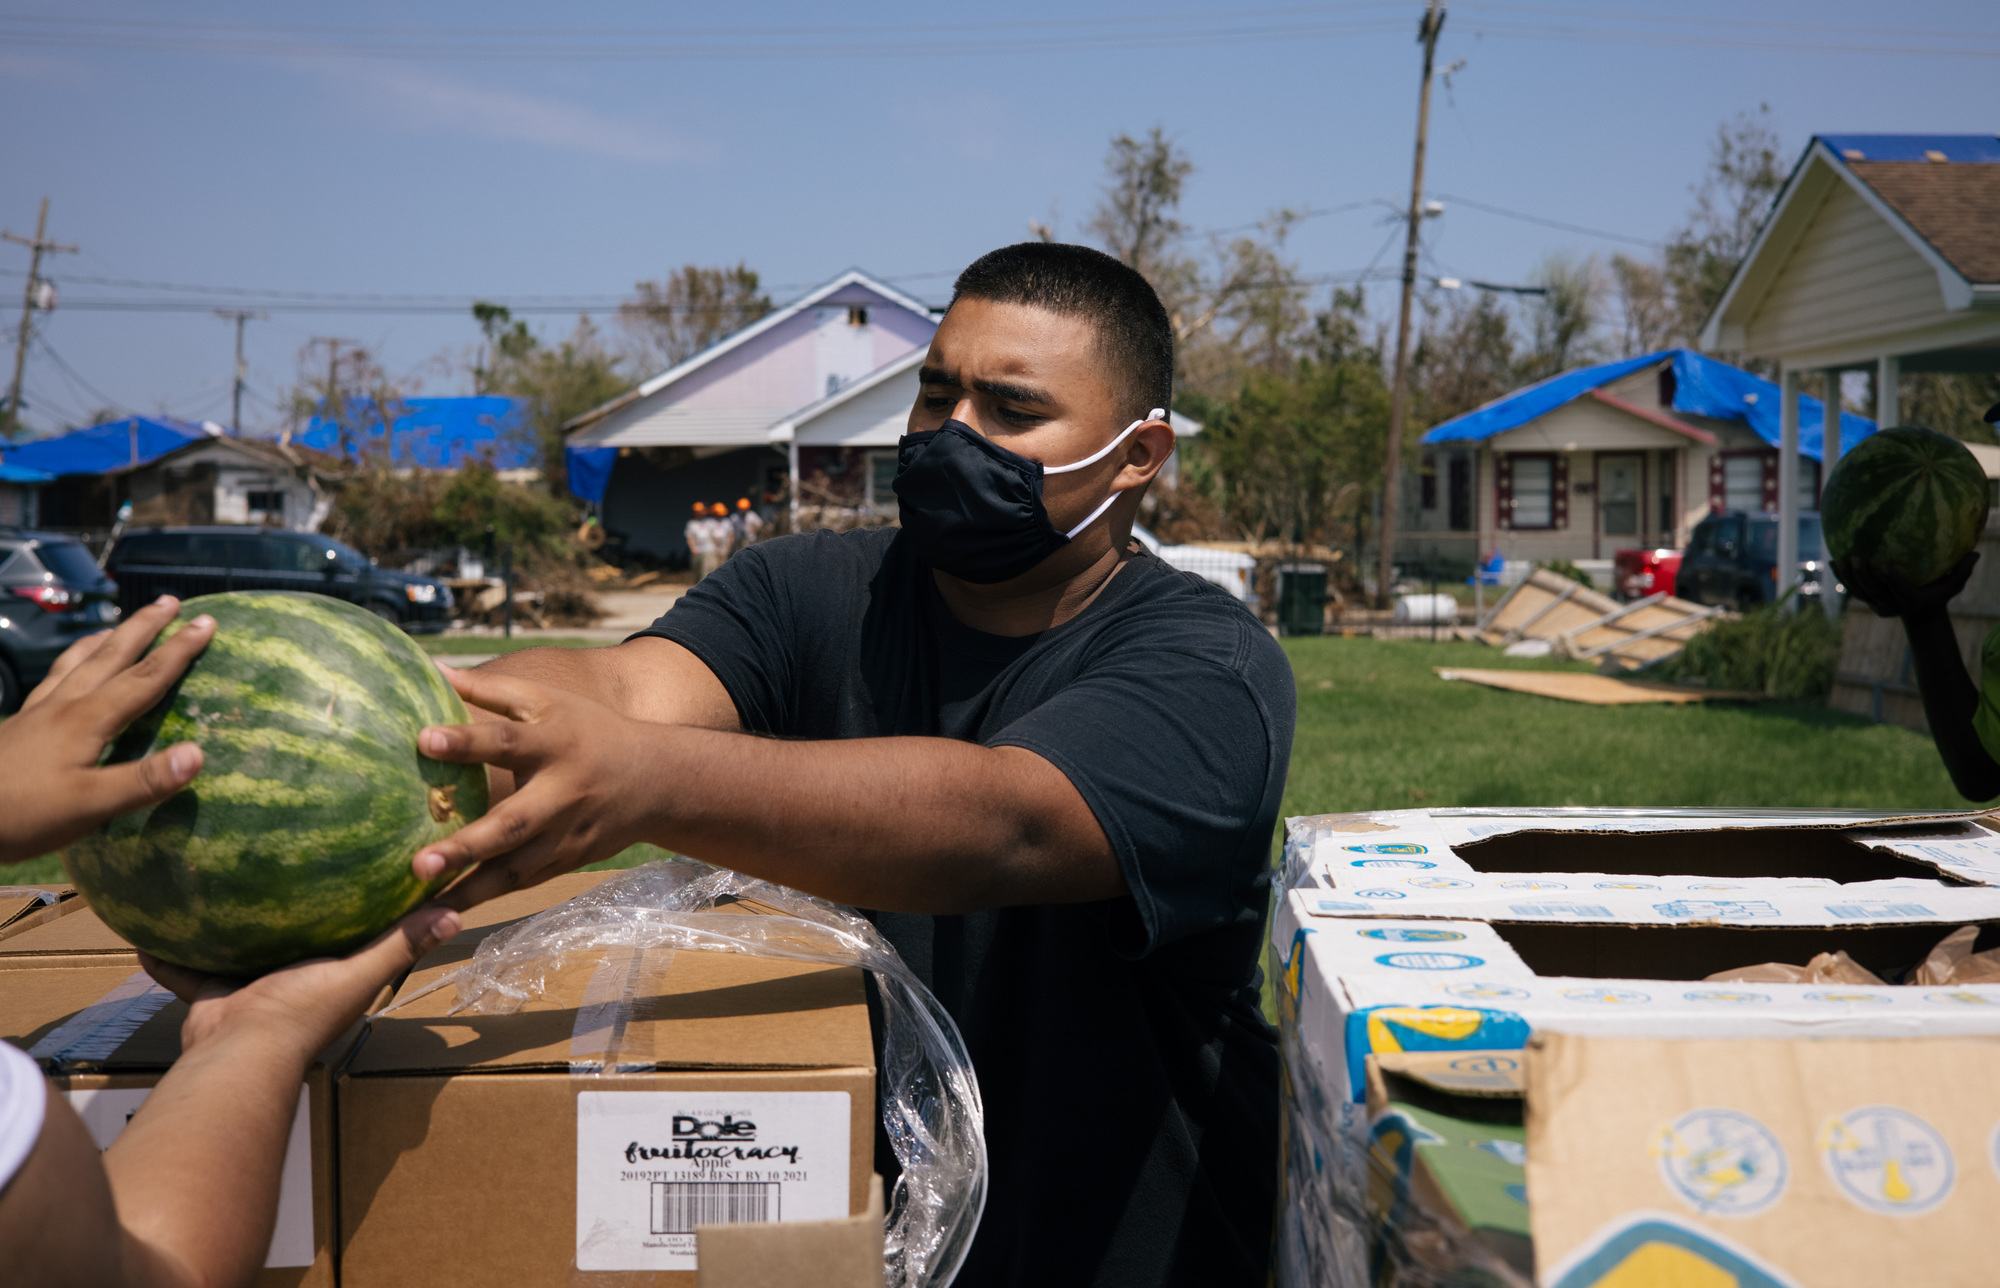 19-year-old Daniel helps out at a food pantry in Houma, L.A. after Hurricane Ida.